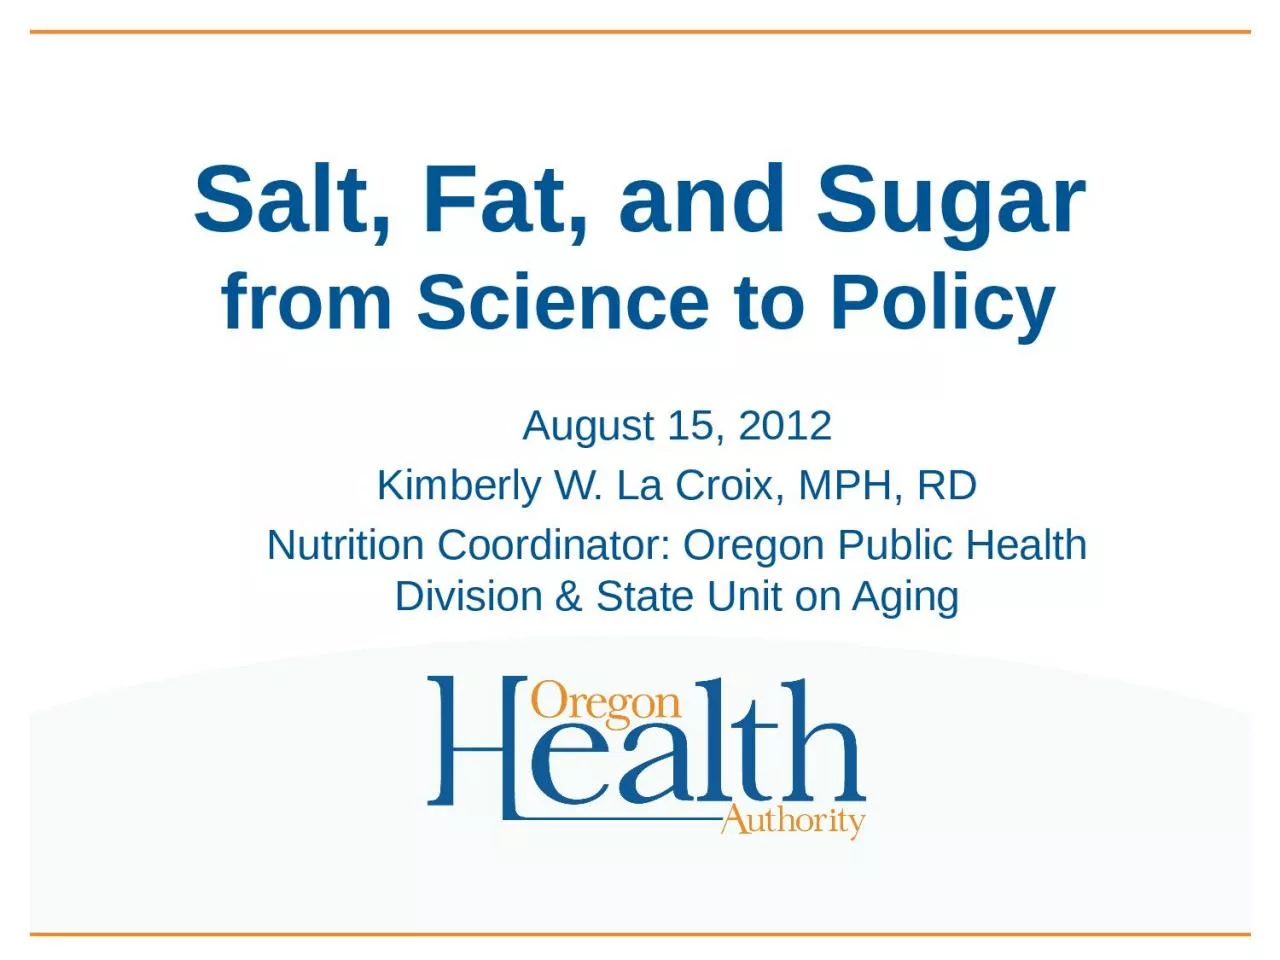 Salt, Fat, and Sugar from Science to Policy